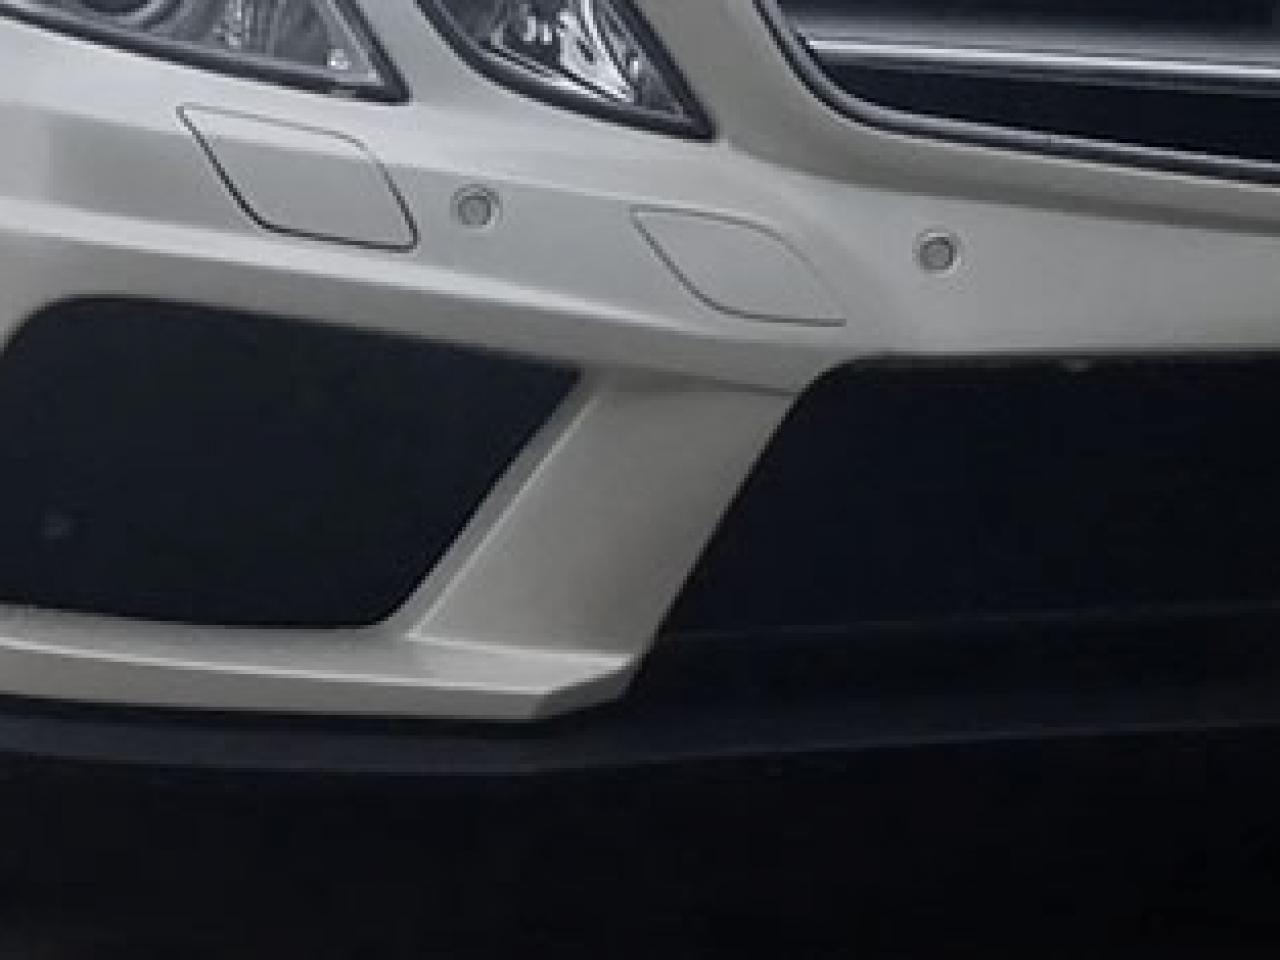 Check our price and buy Prior Design PD550 body kit for Mercedes-Benz E-class C207